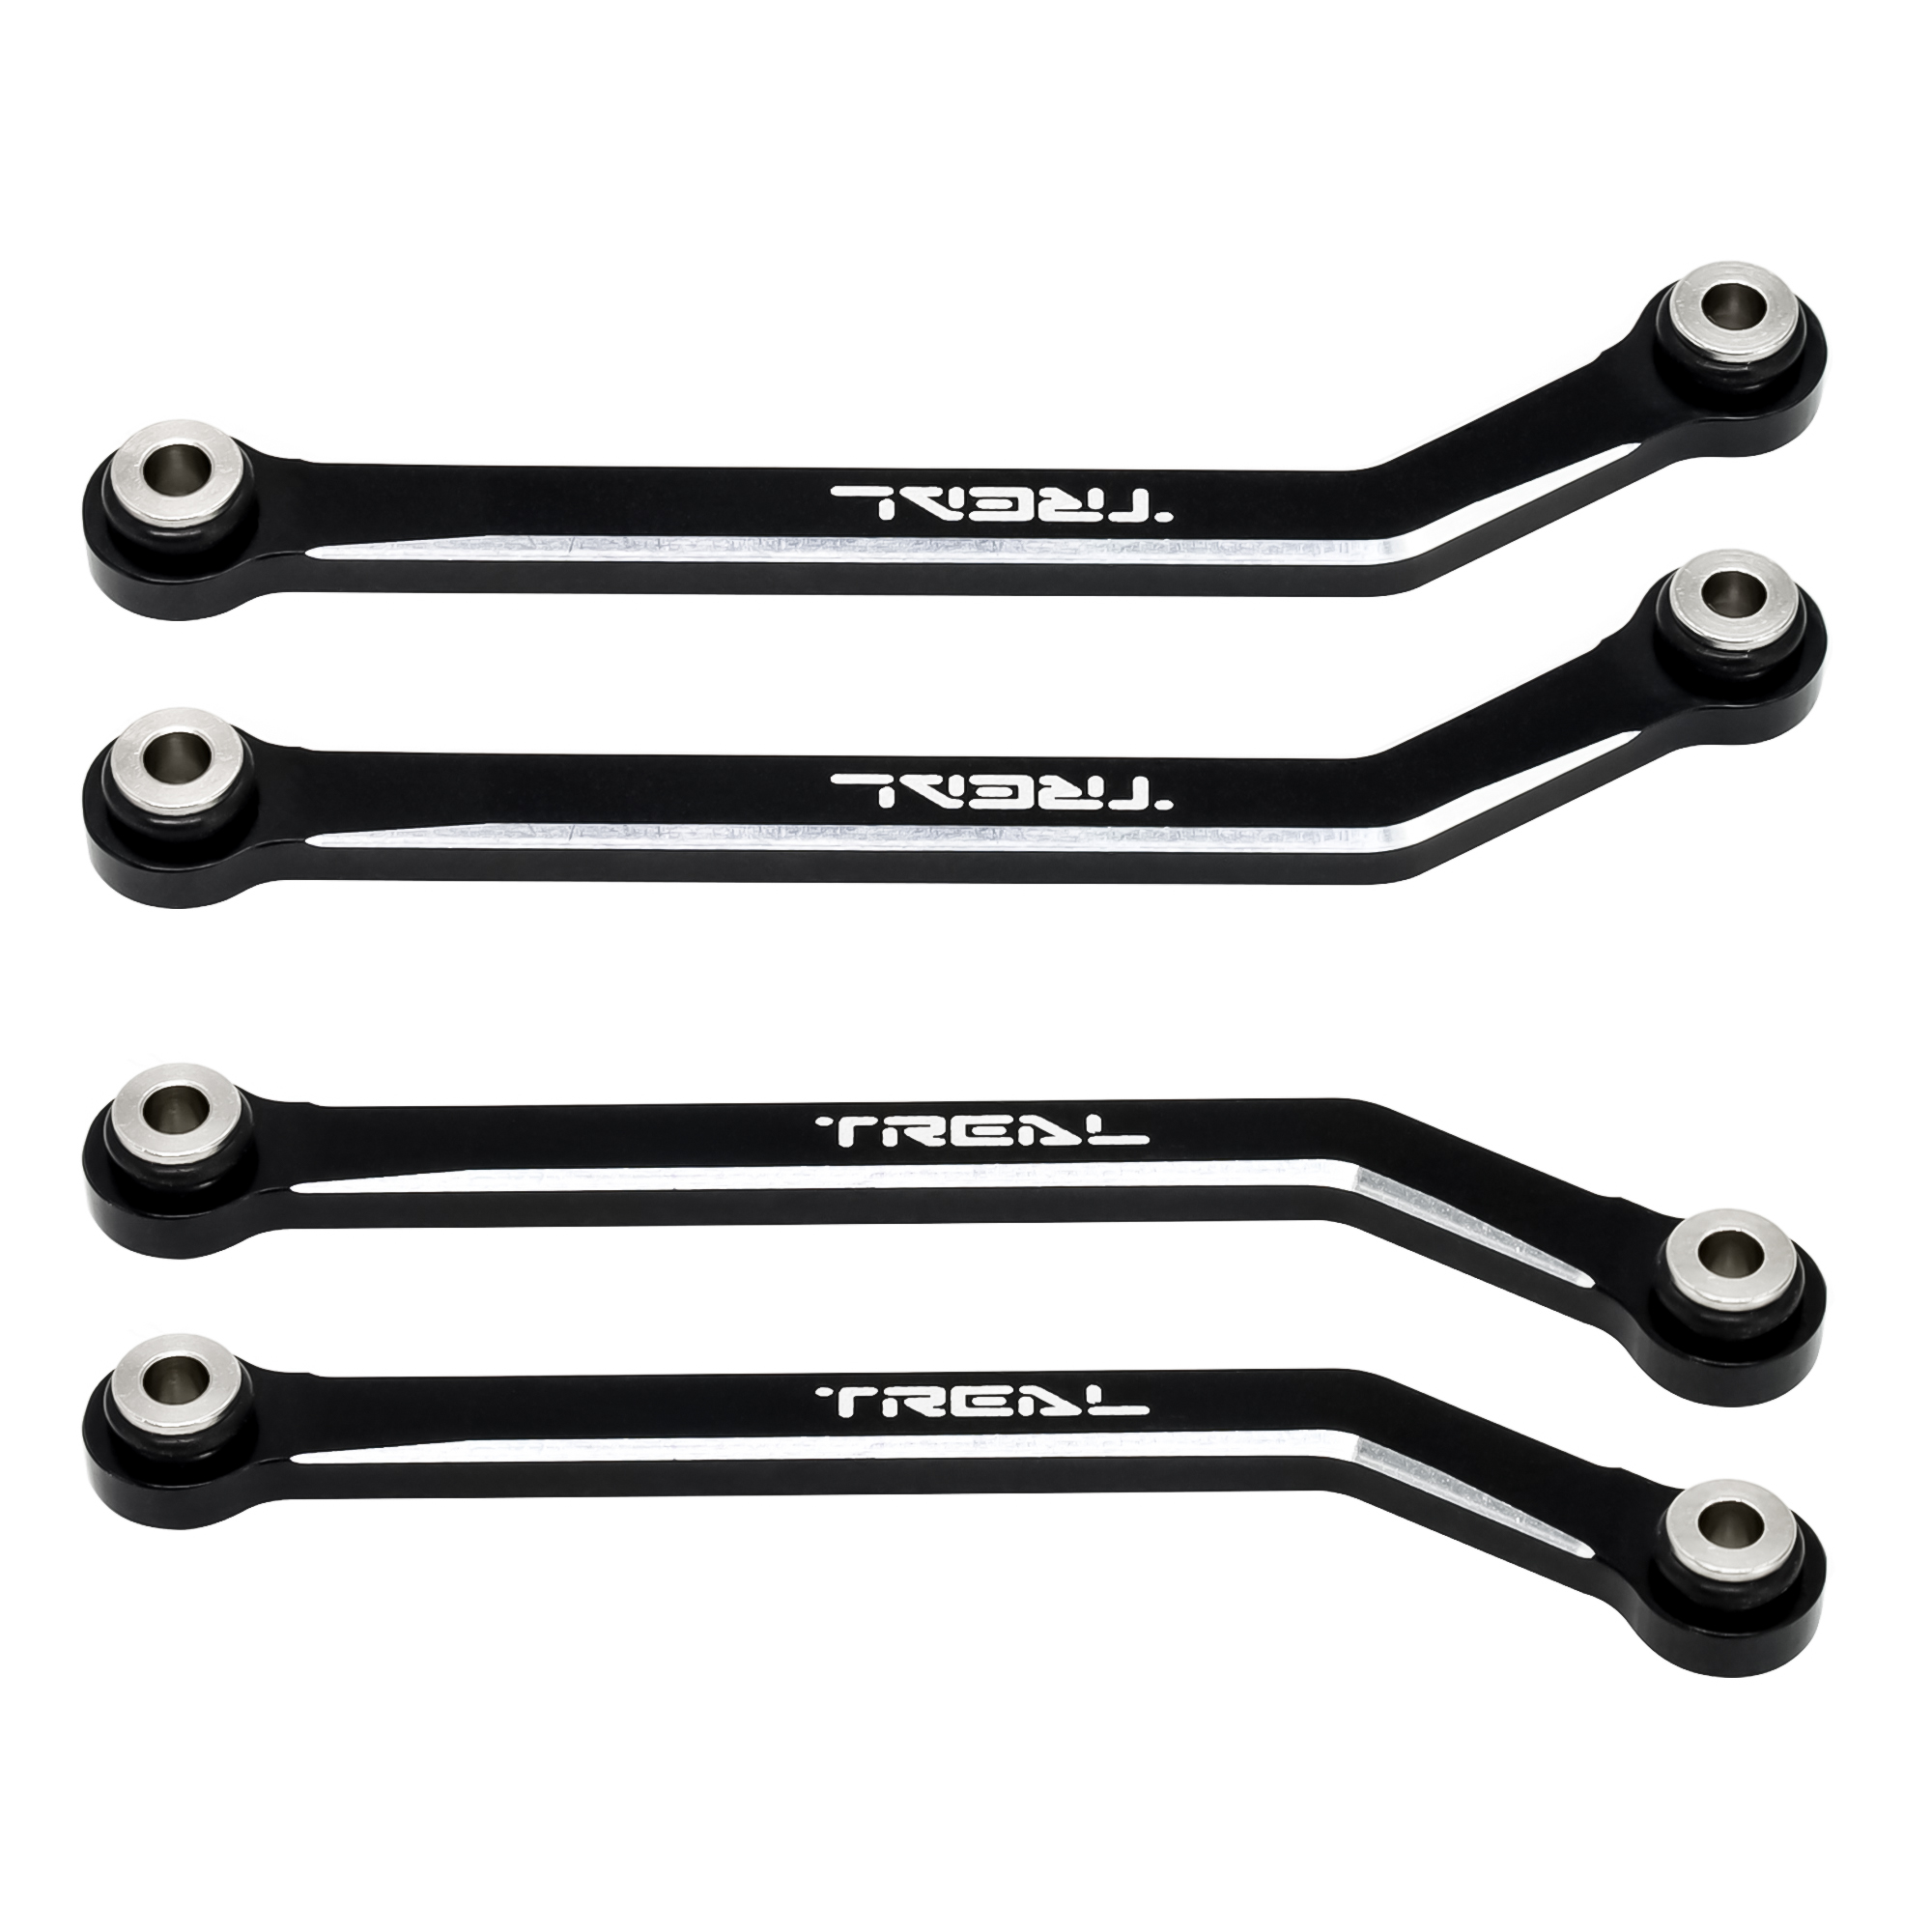 TREAL FCX24 High Clearance Links, Aluminum 7075 Chassis Lower Linkages (4p)  for 1/24 FMS FCX24